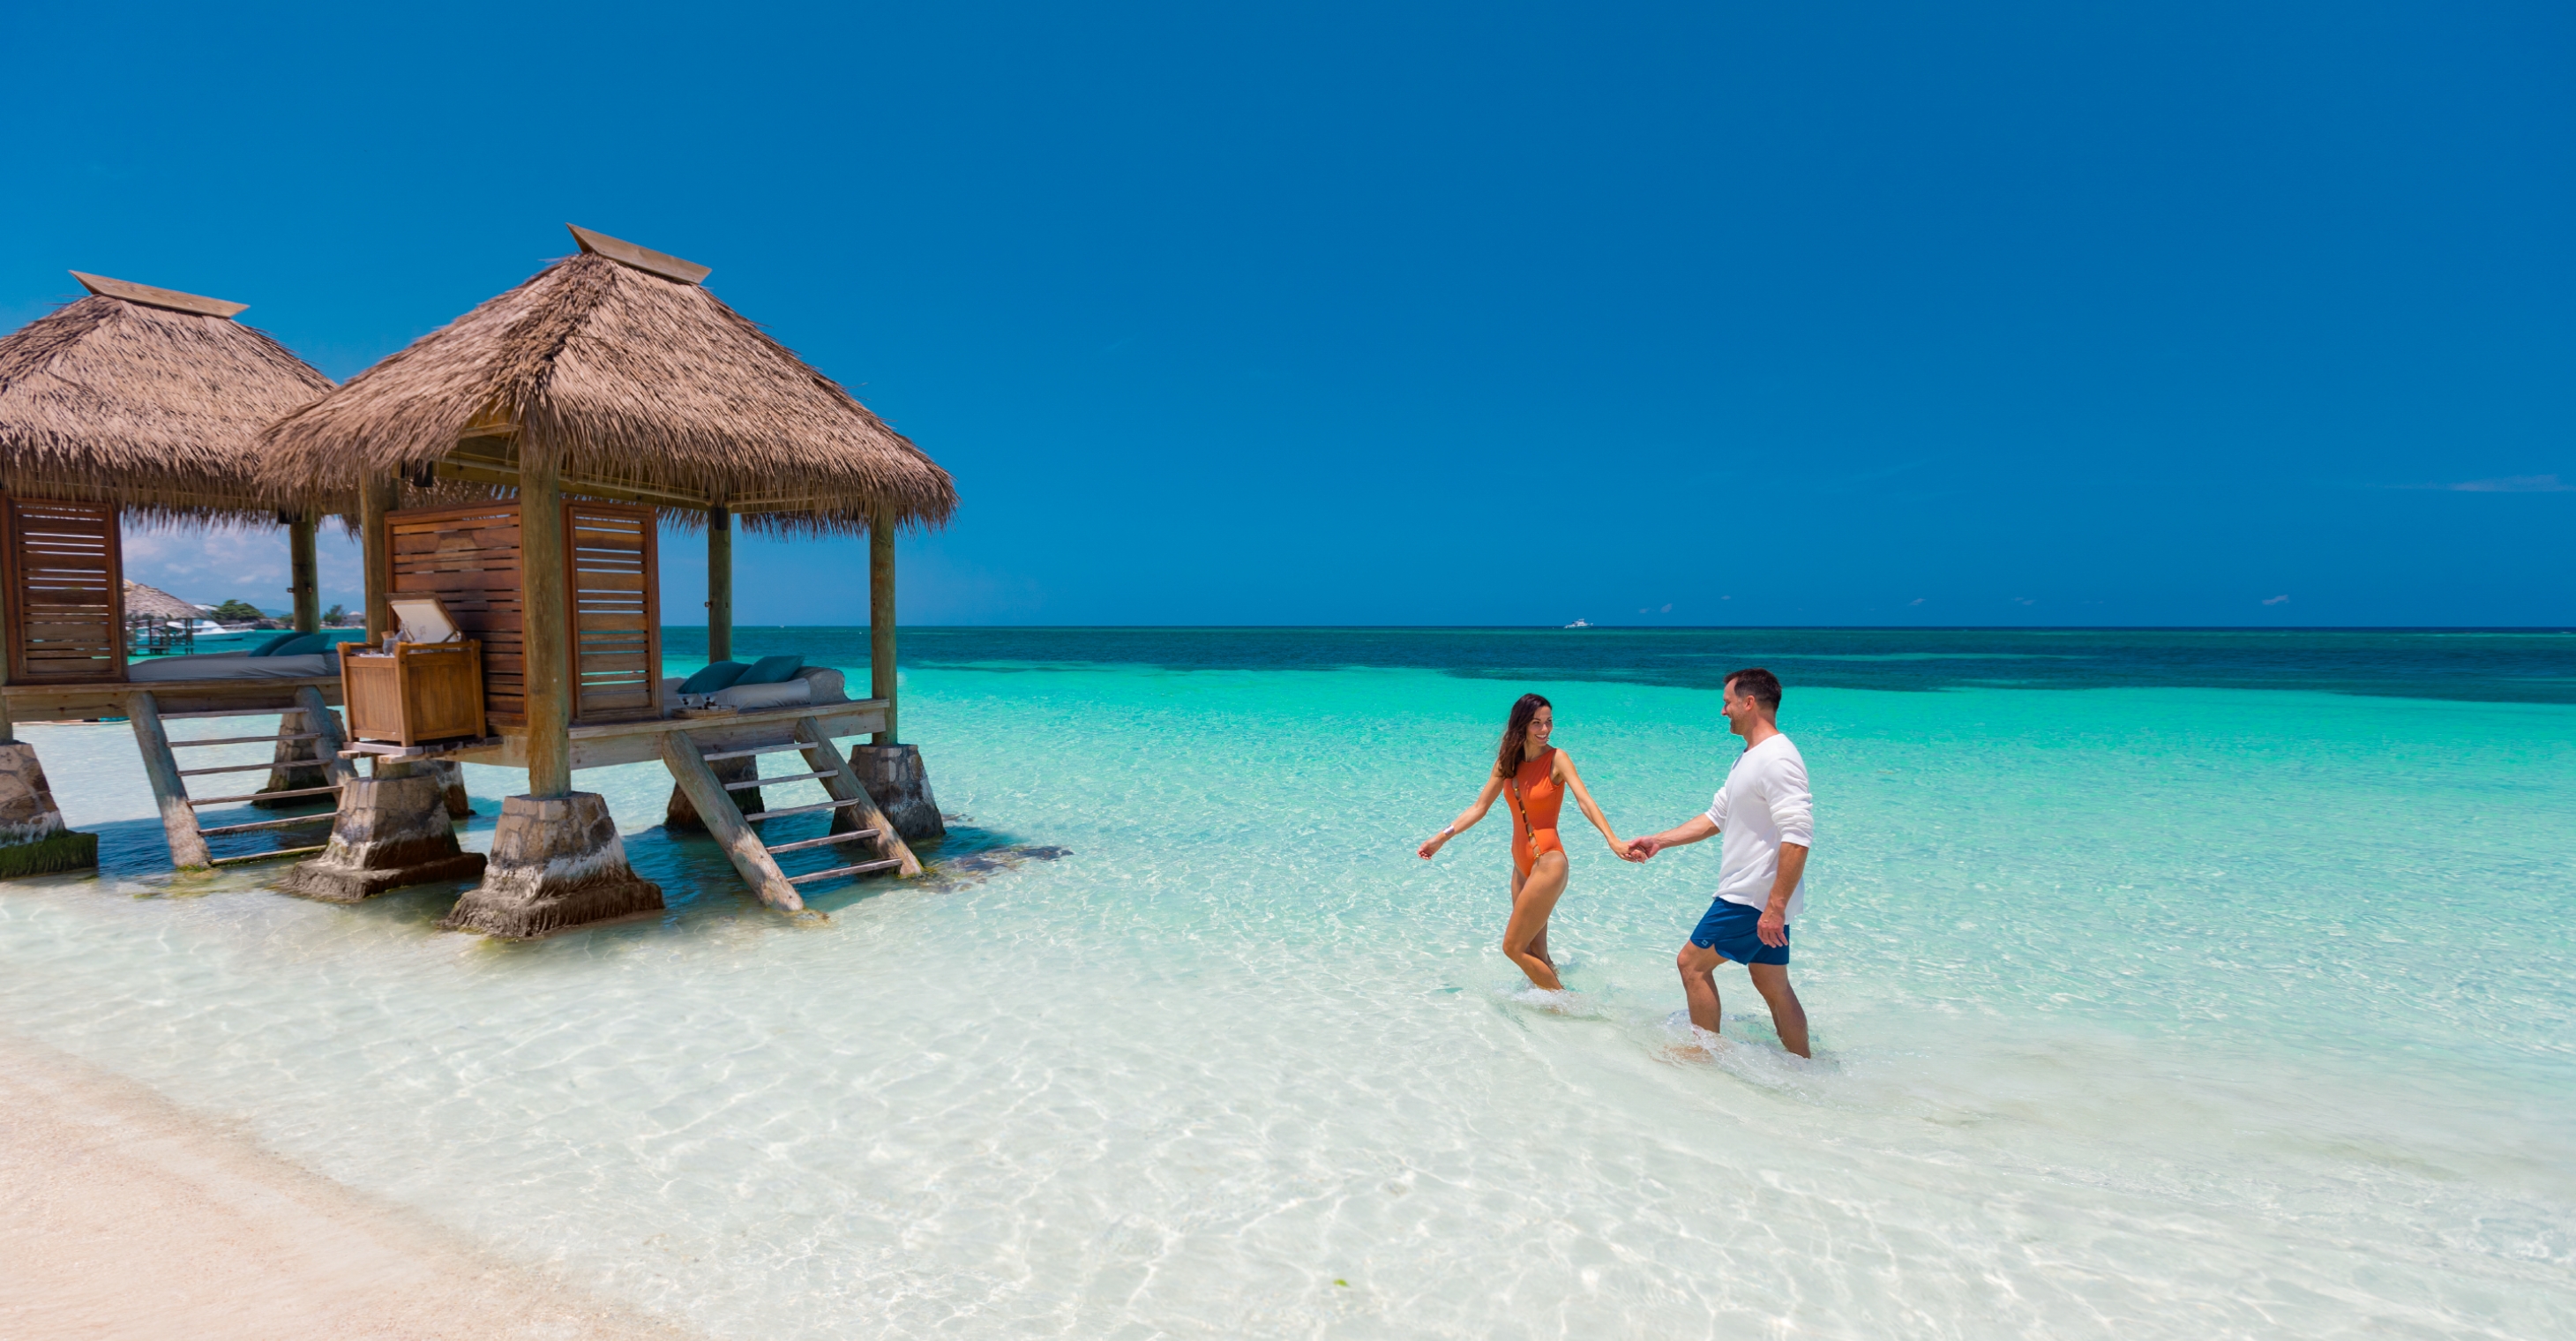 Sandals Locations: Where Are Sandals Resorts?